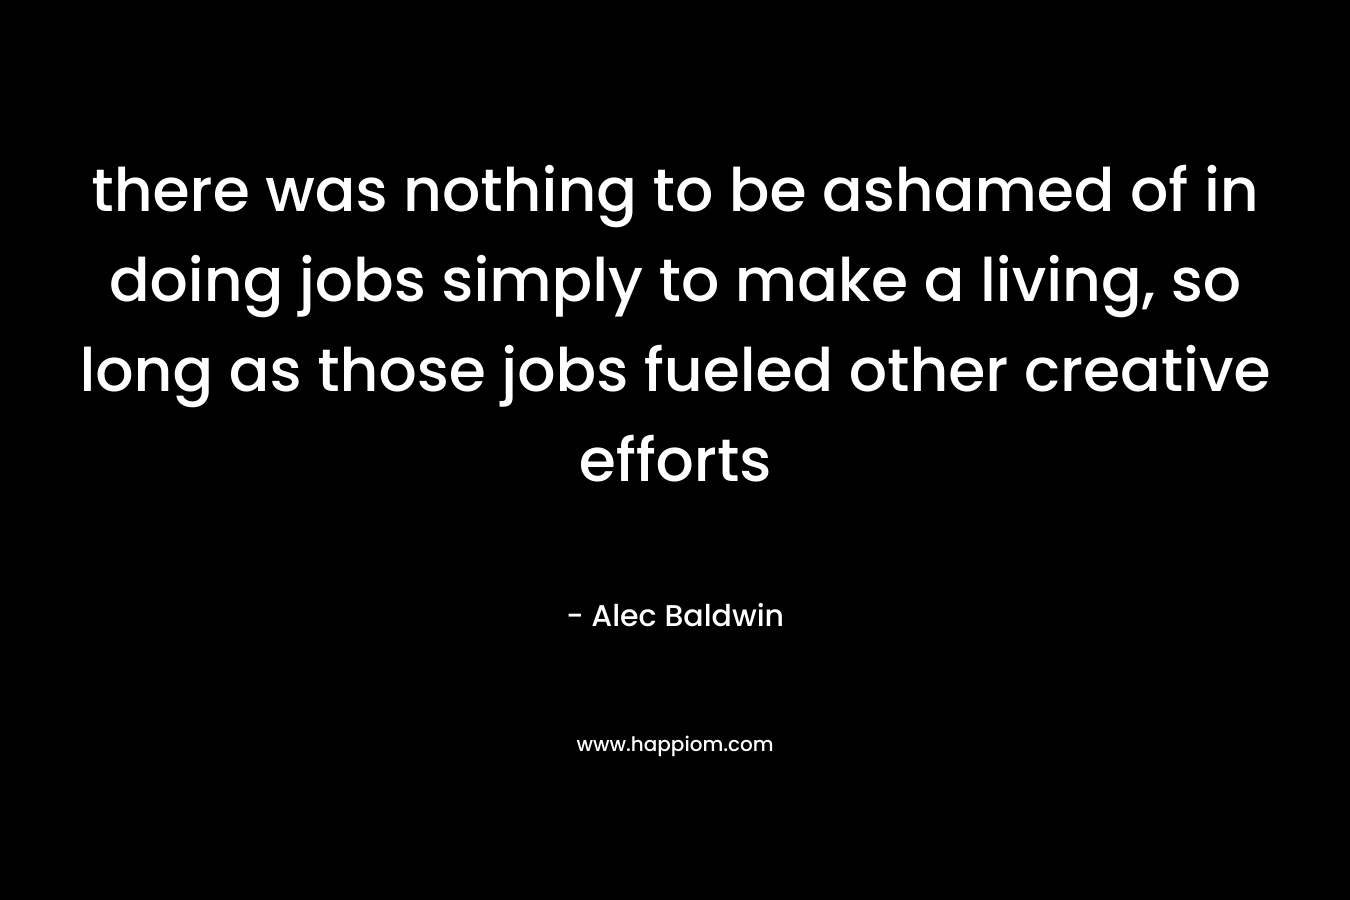 there was nothing to be ashamed of in doing jobs simply to make a living, so long as those jobs fueled other creative efforts